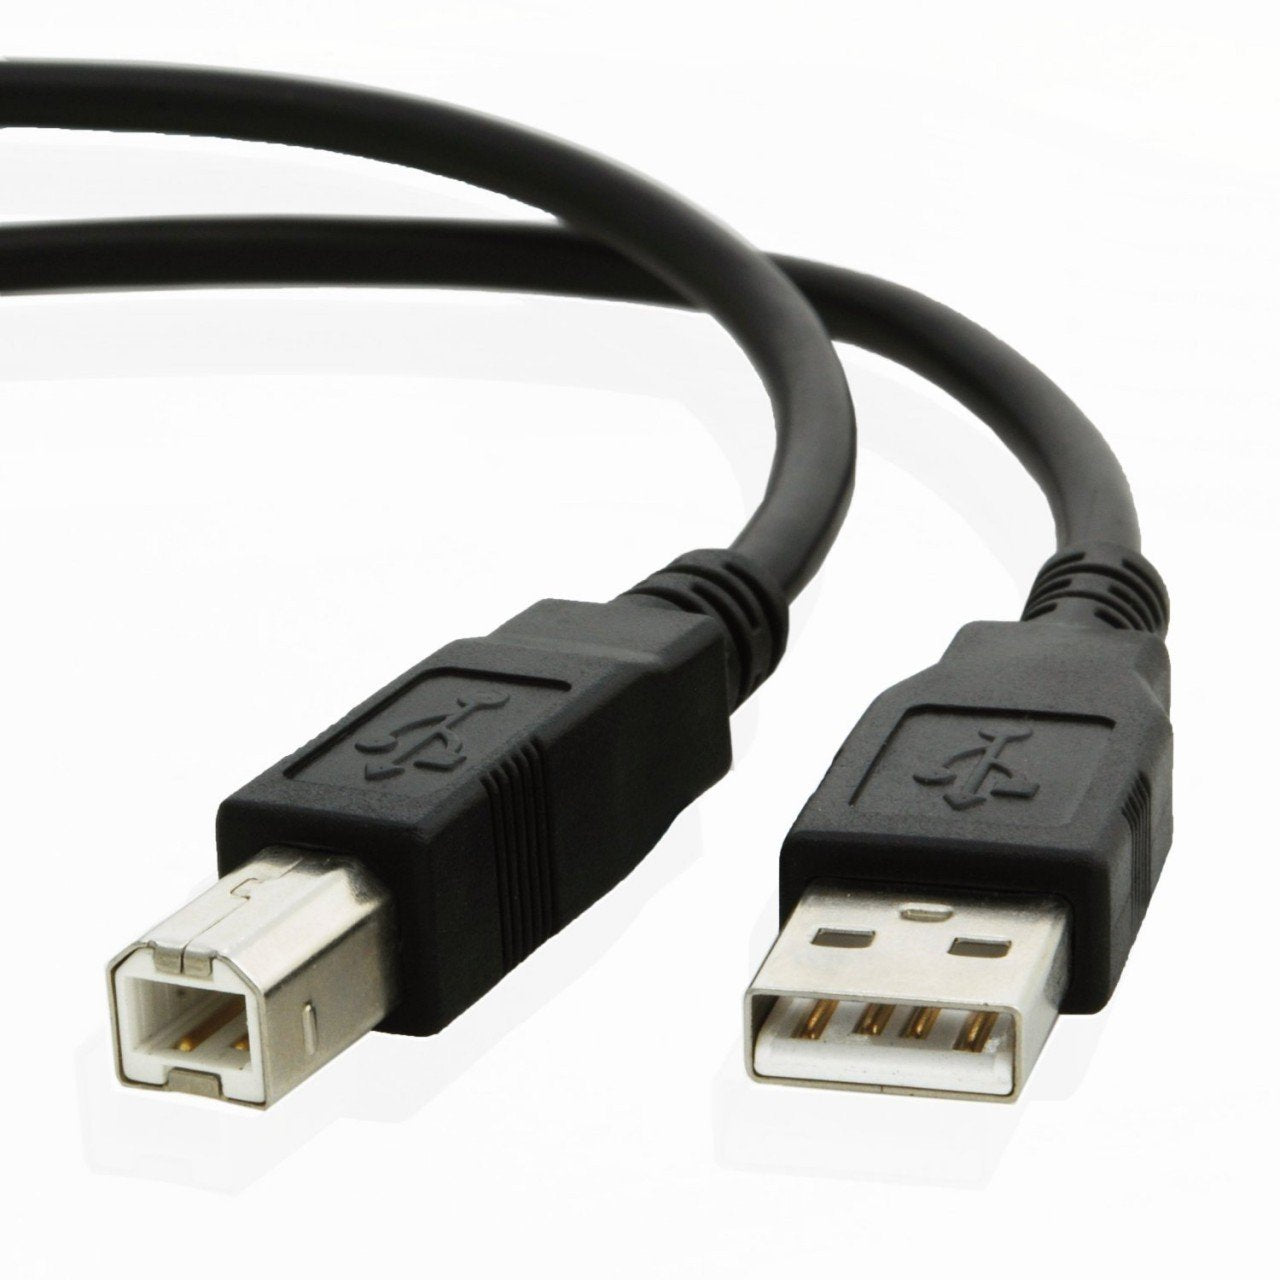 USB cable for Canon ISENSYS MF229DW